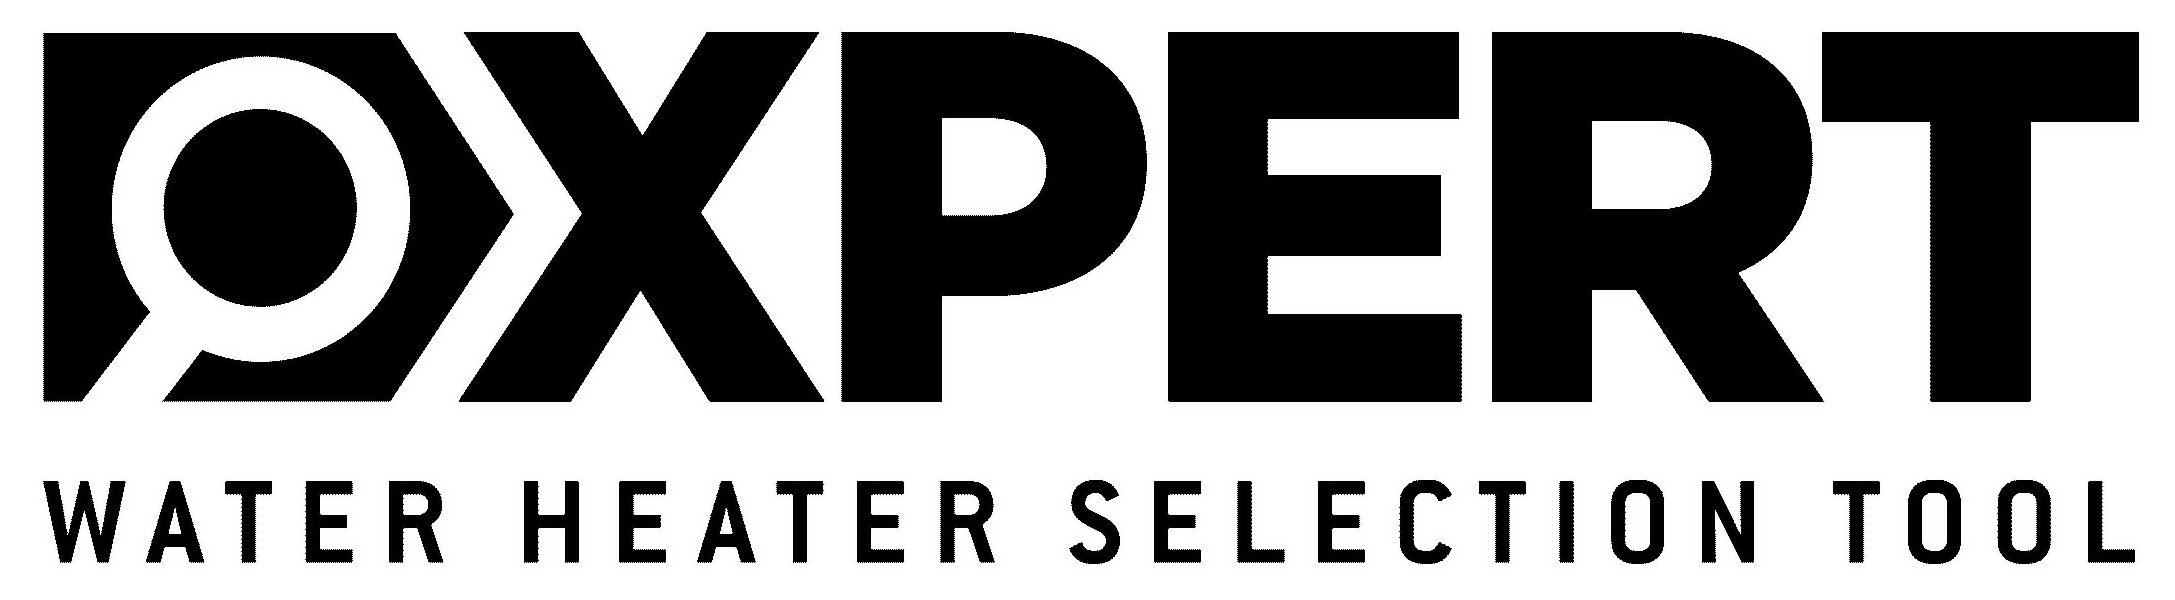  XPERT WATER HEATER SELECTION TOOL